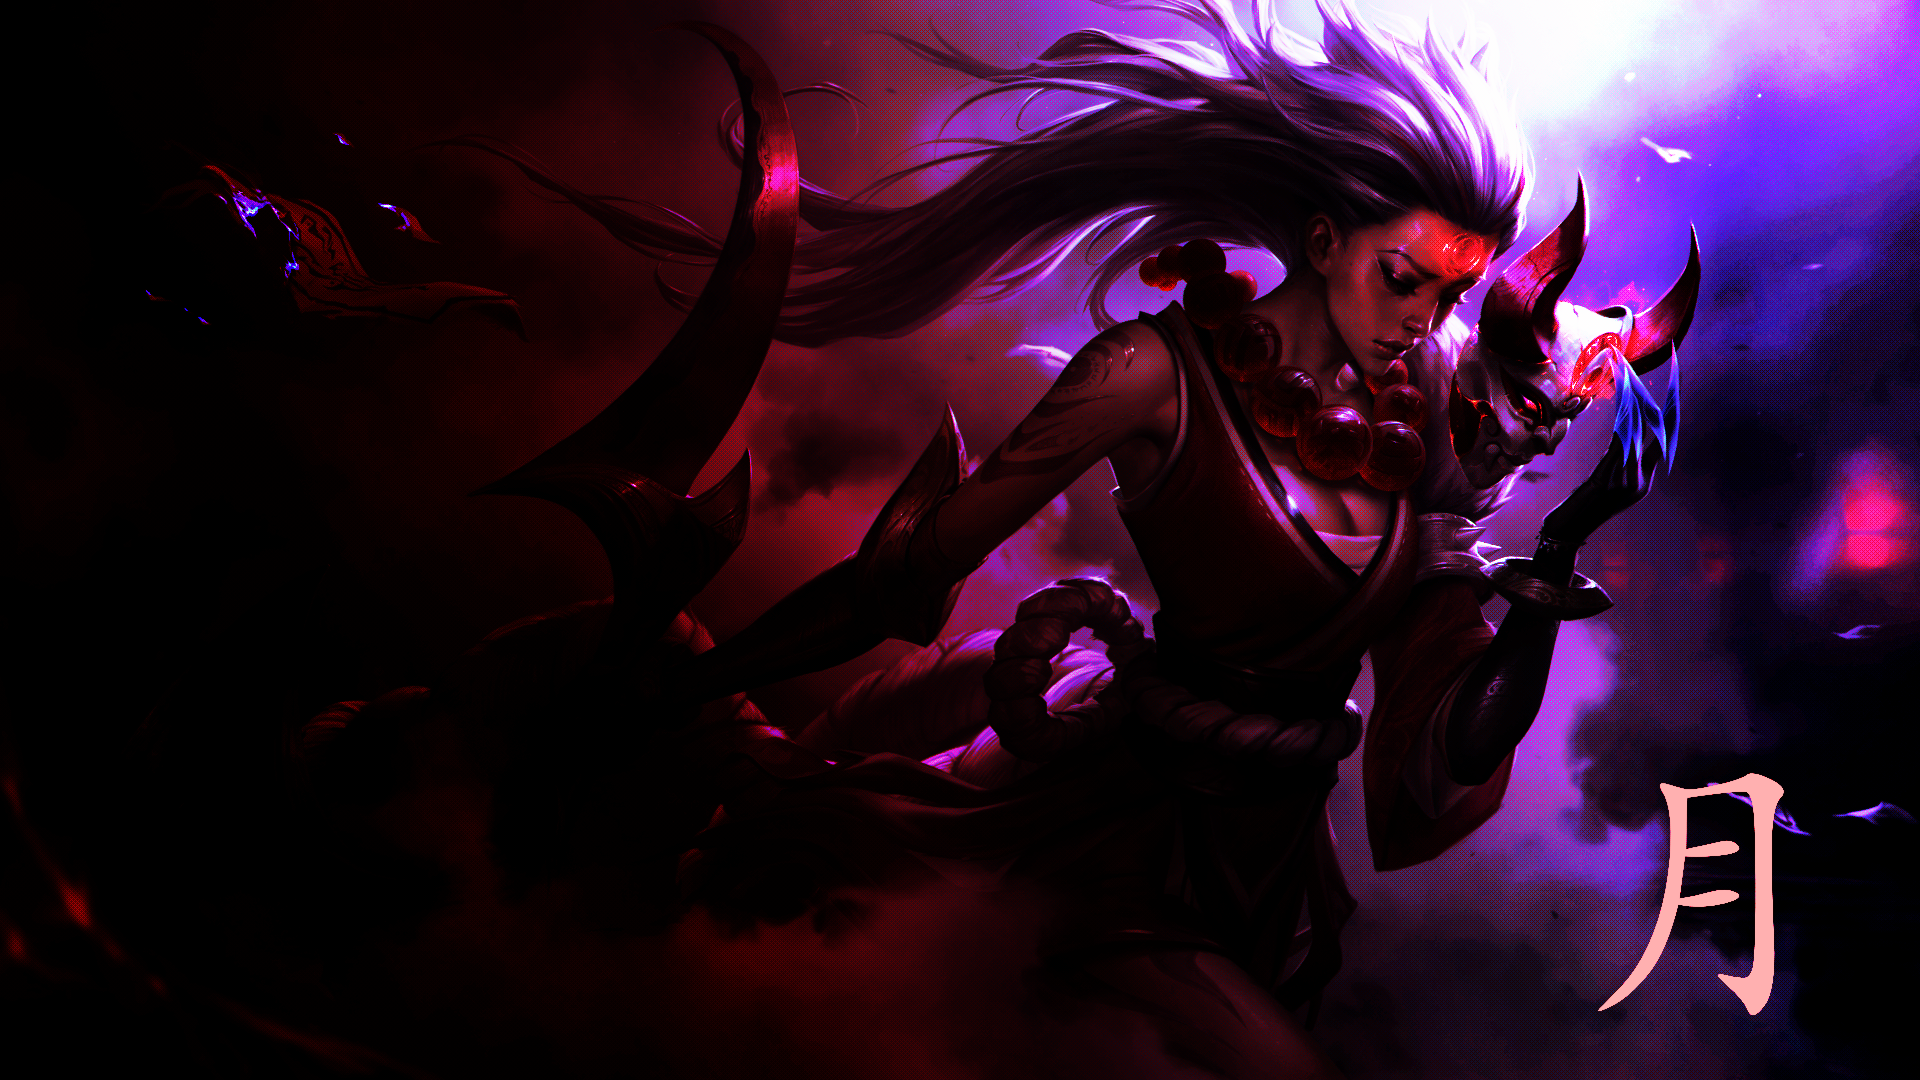 Blood Moon Diana Wallpapers.